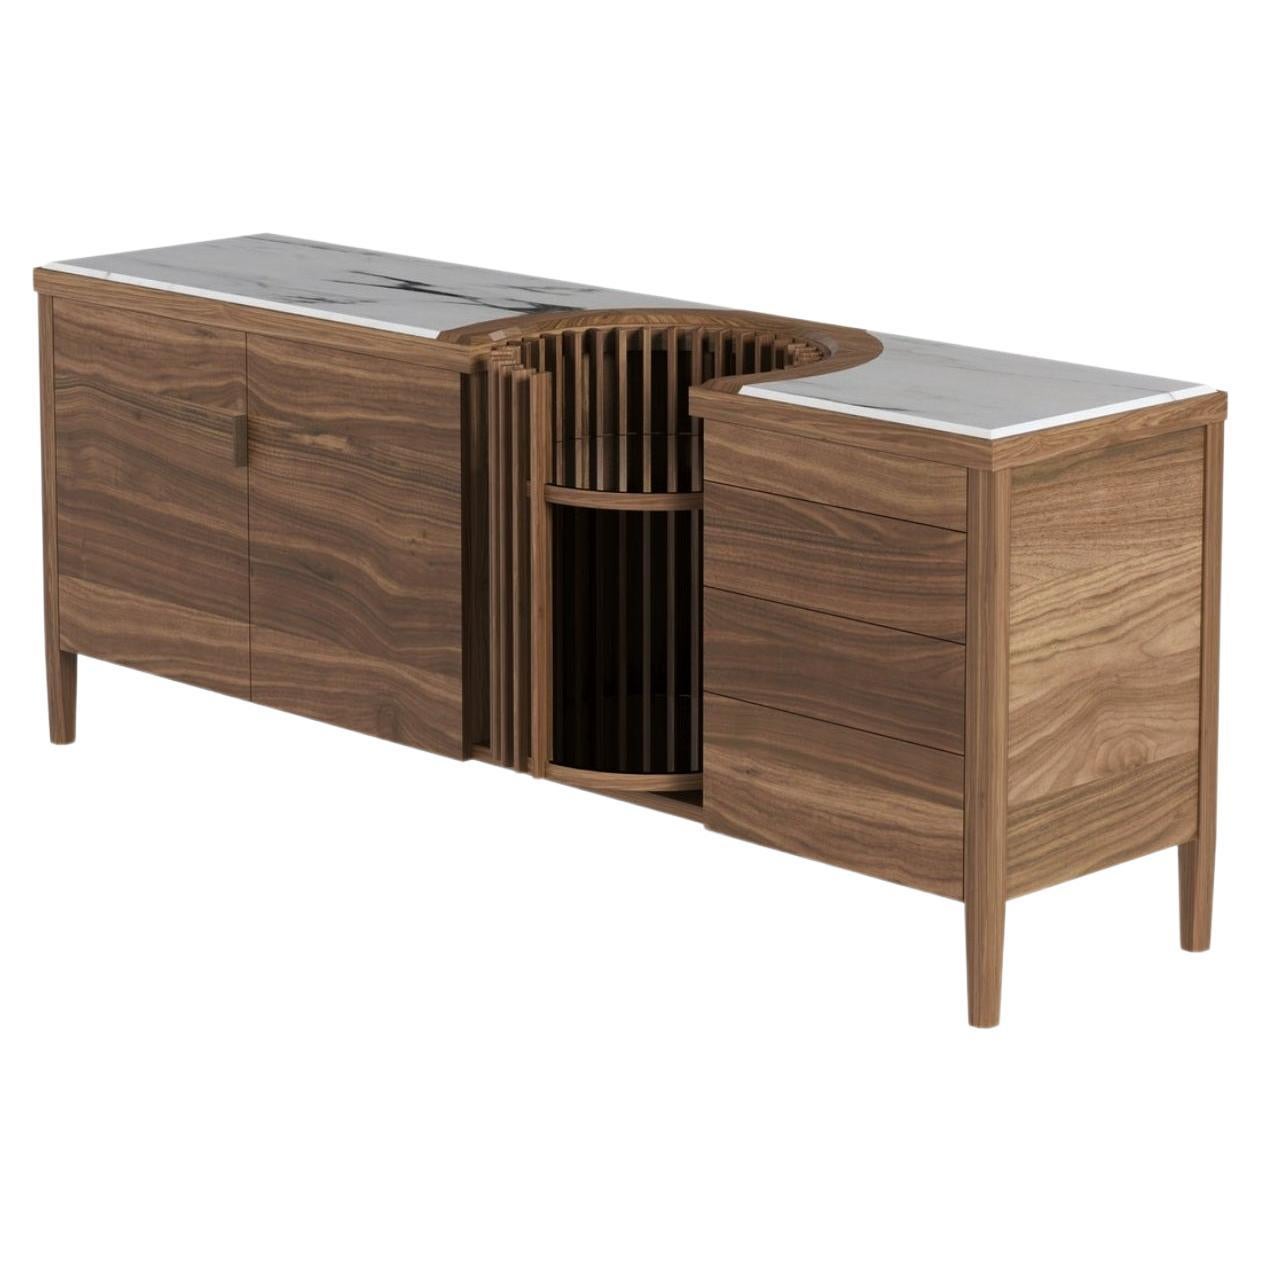 This beautiful solid walnut and marble top sideboard features two folding doors with internal wooden shelves and four drawers with tic-tac system, emphasizing the high quality of the materials and our skilled craftsmanship.

The focal point of the